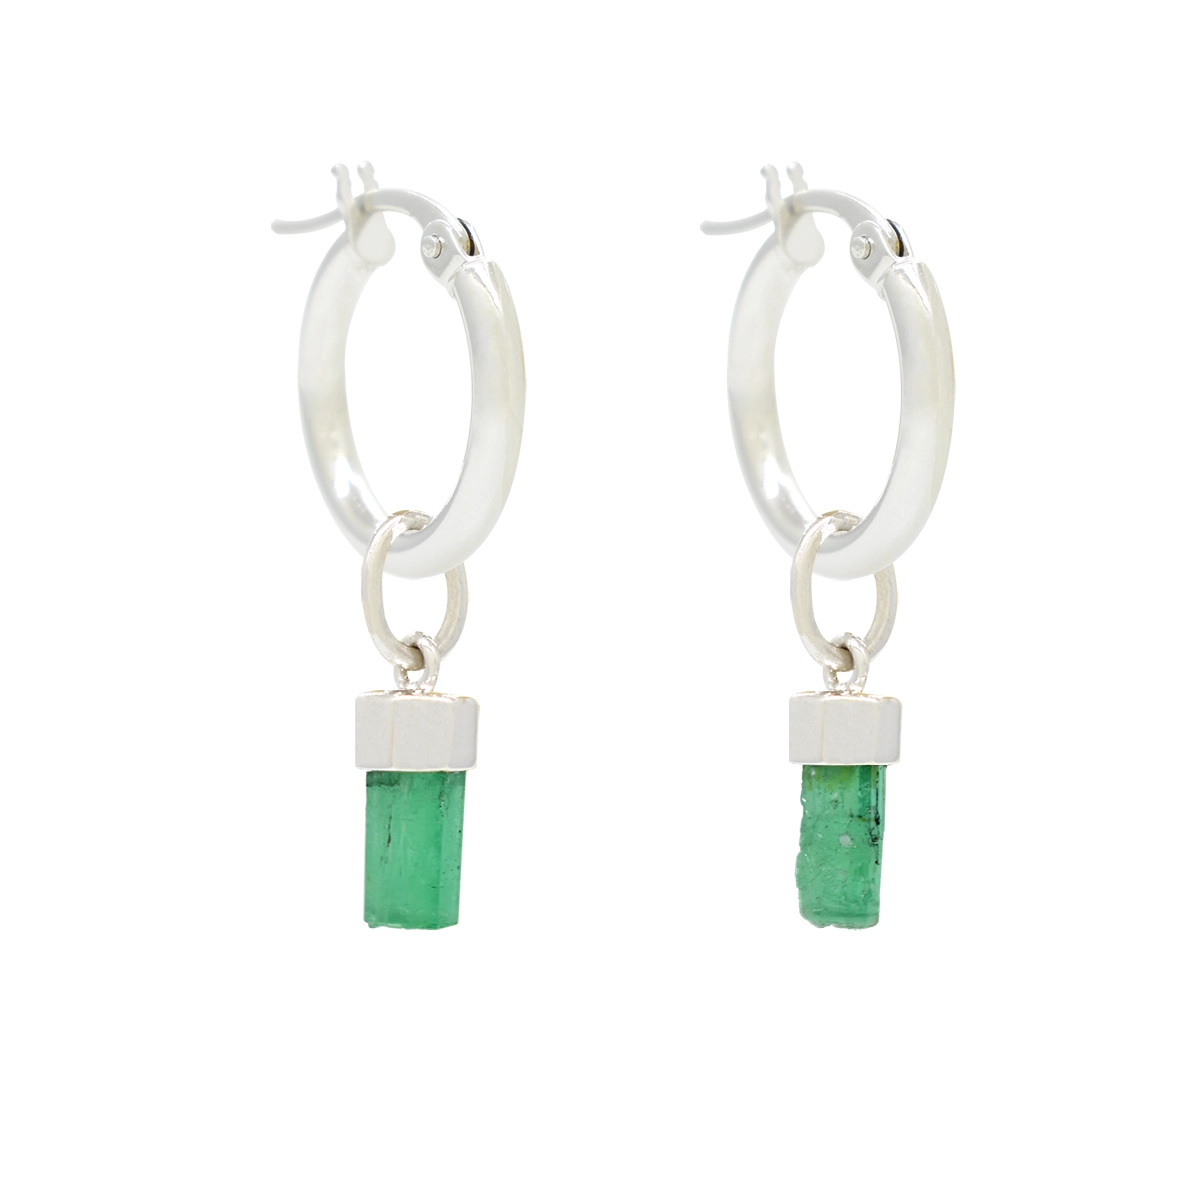 Hoop Earrings in 18K White Gold with Uncut Natural Emeralds